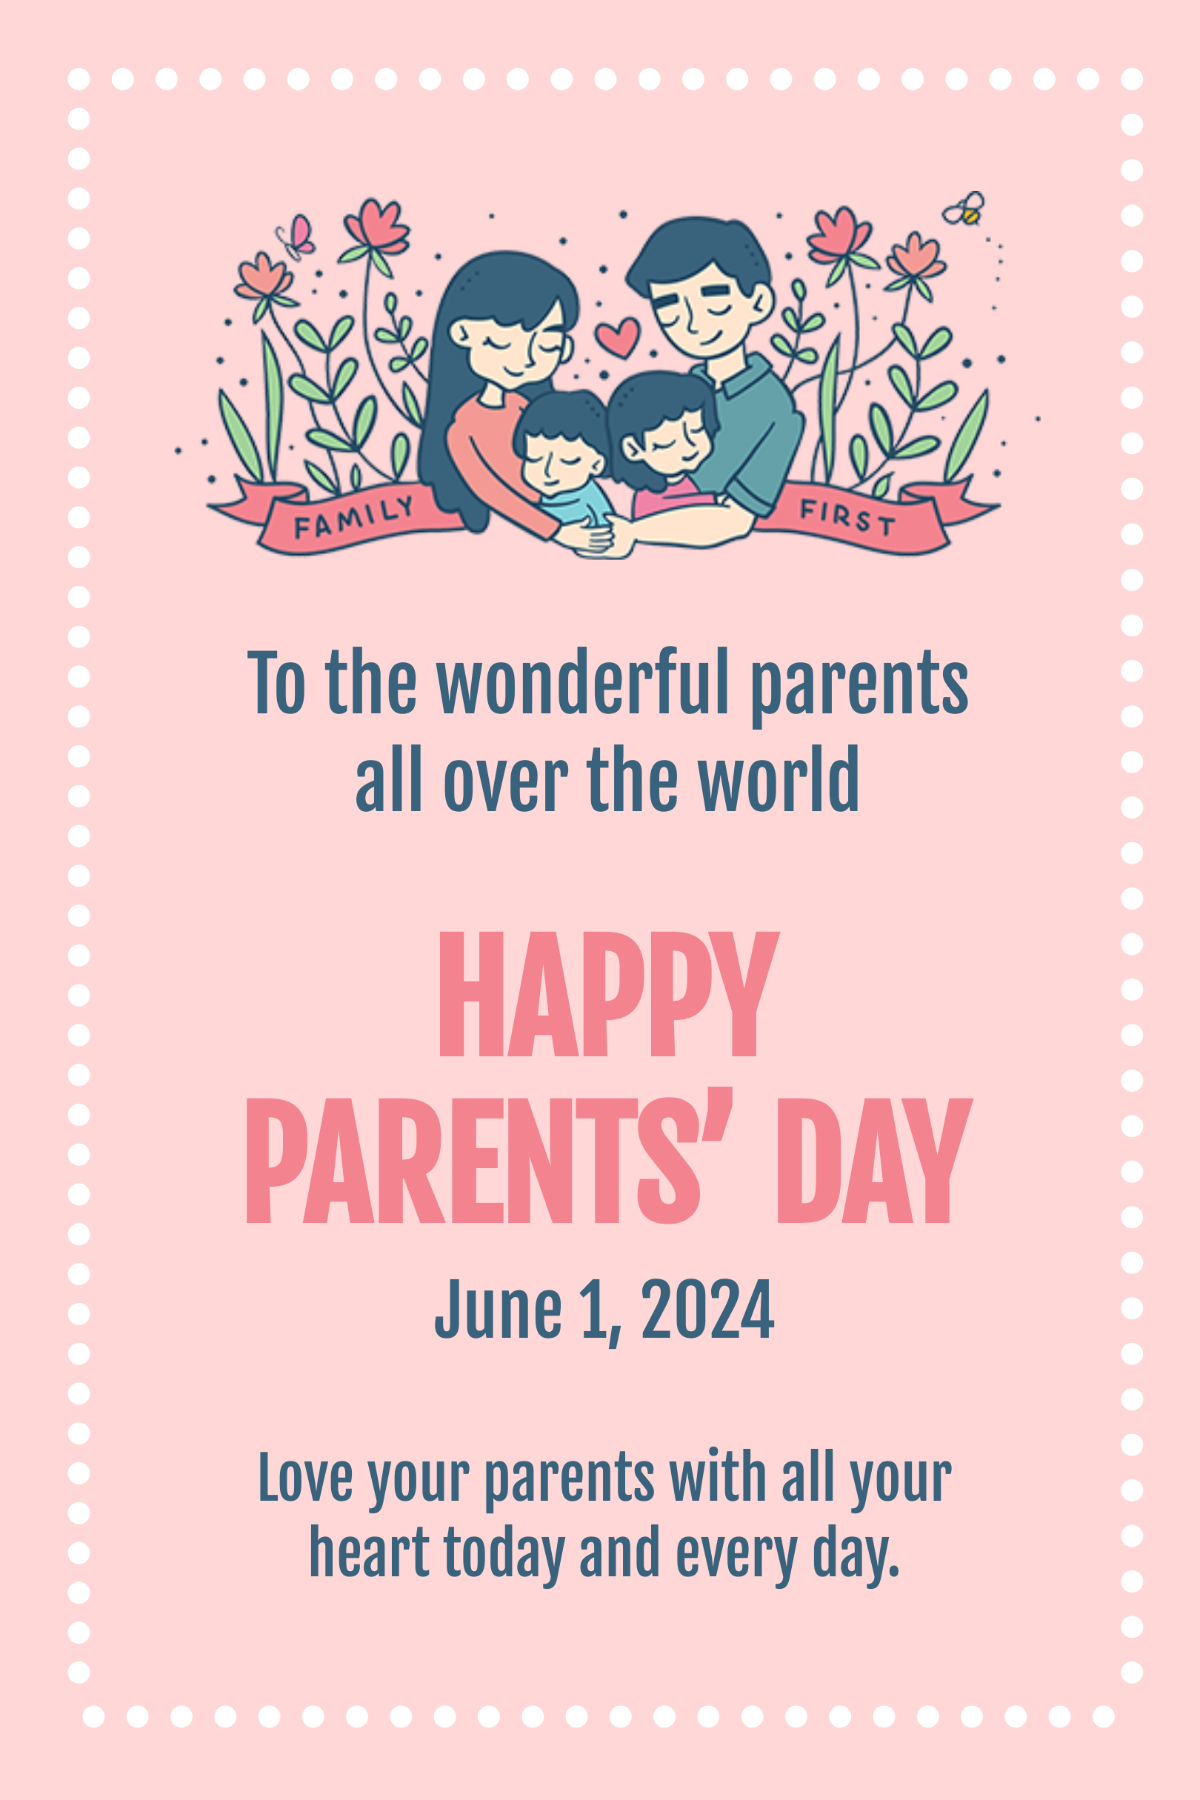 Free Parents Day Tumblr Post Template